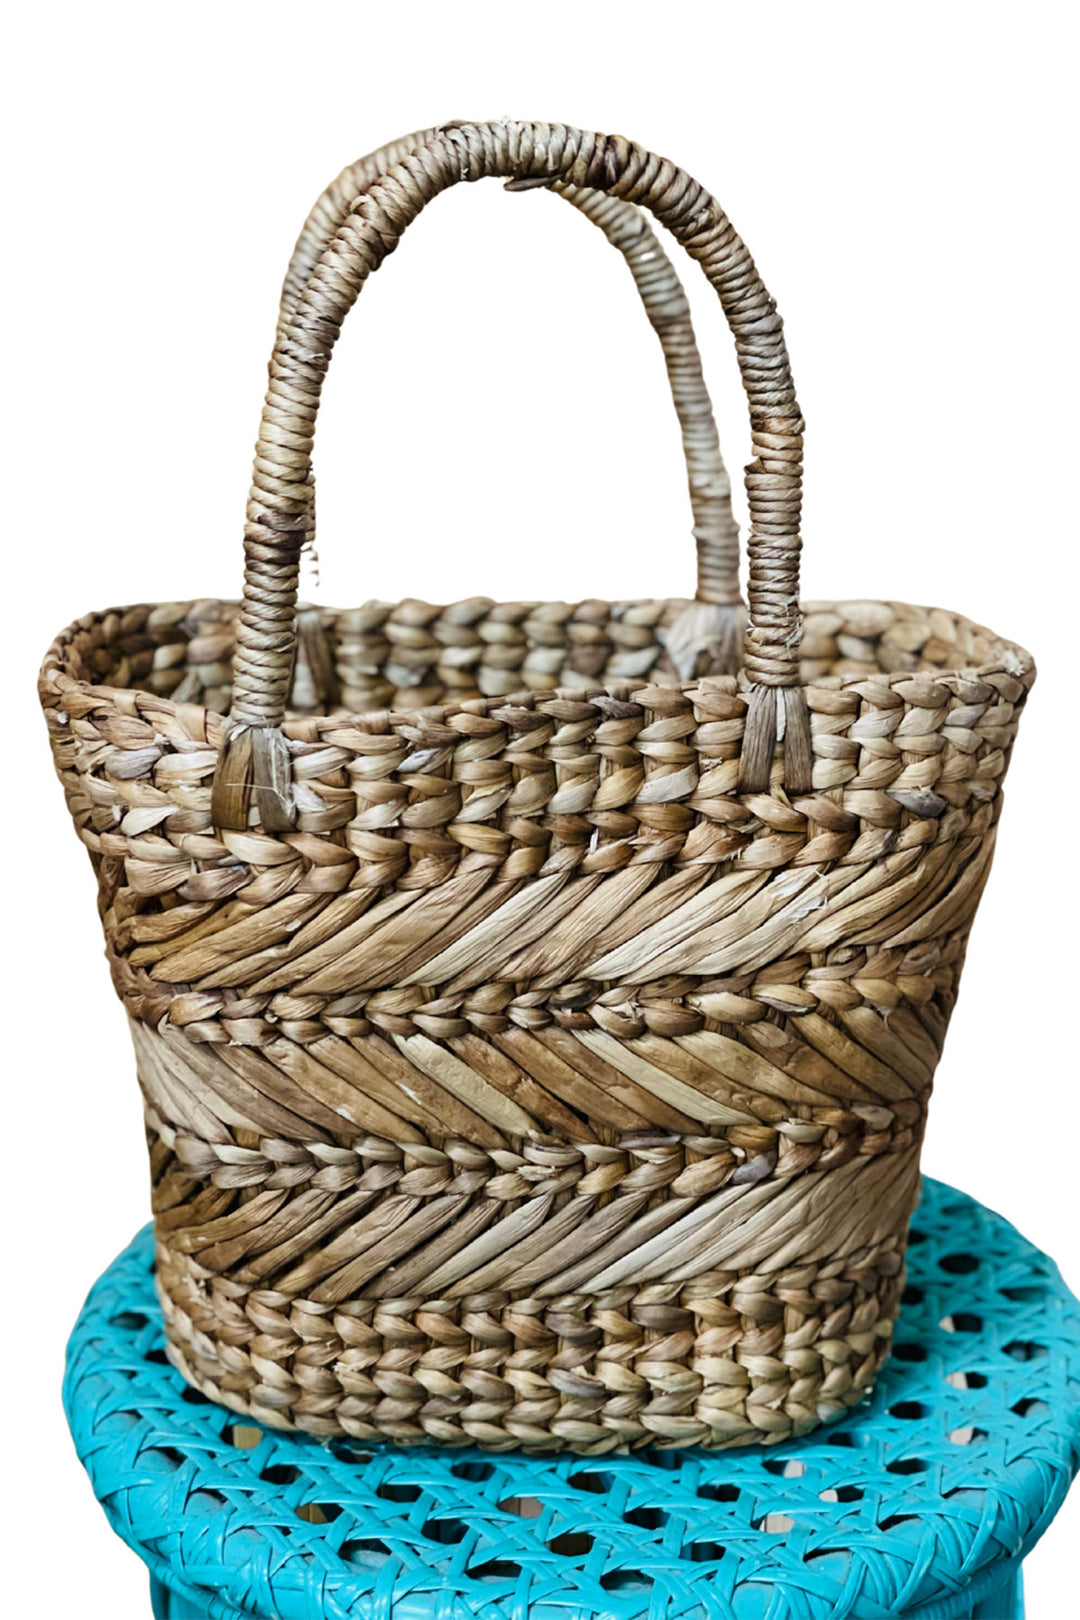 hand crafted rattan can carry basket bag